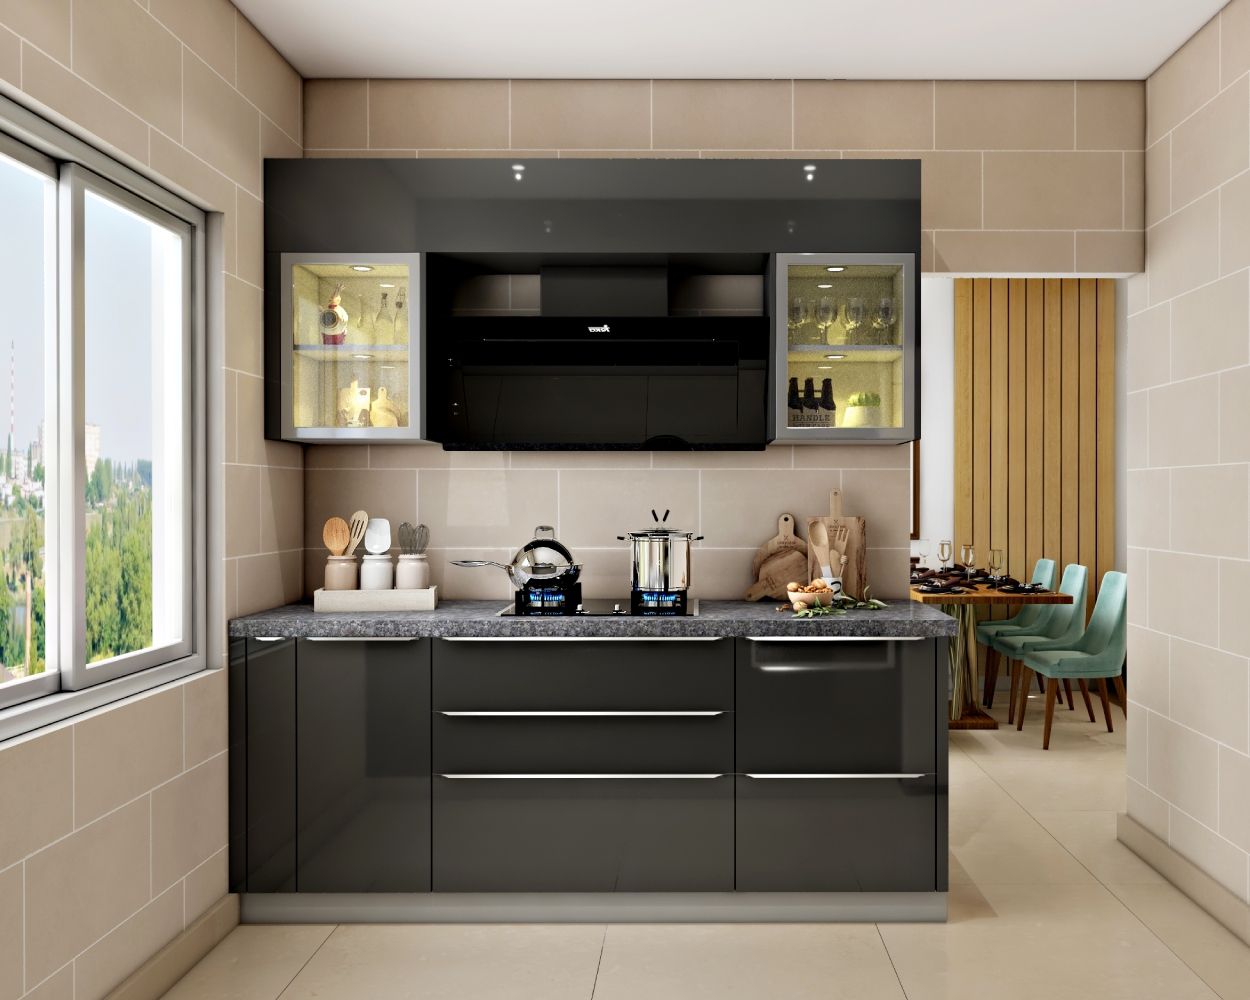 Contemporary Modular Slate Grey Parallel Kitchen Design With Beige Subway Wall iles